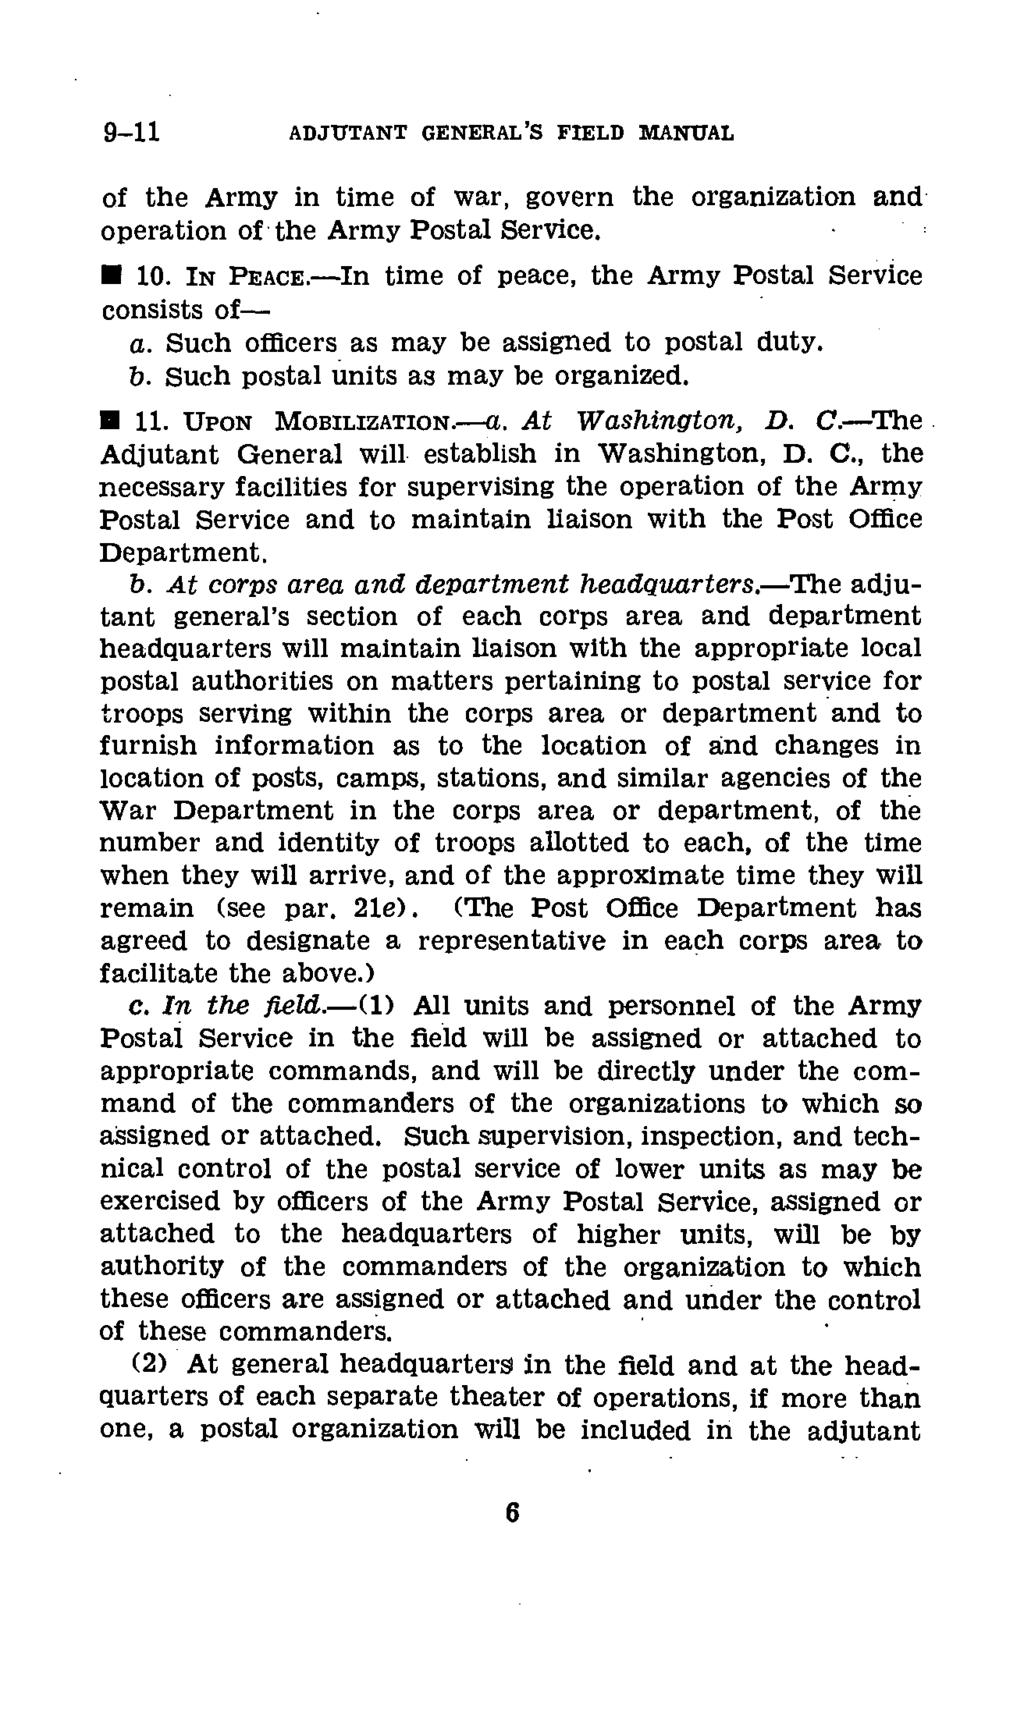 9-11 ADJUTANT GENERAL'S FIELD MANUAL of the Army in time of war, govern the organization and operation of the Army Postal Service. * 10. IN PEACE.